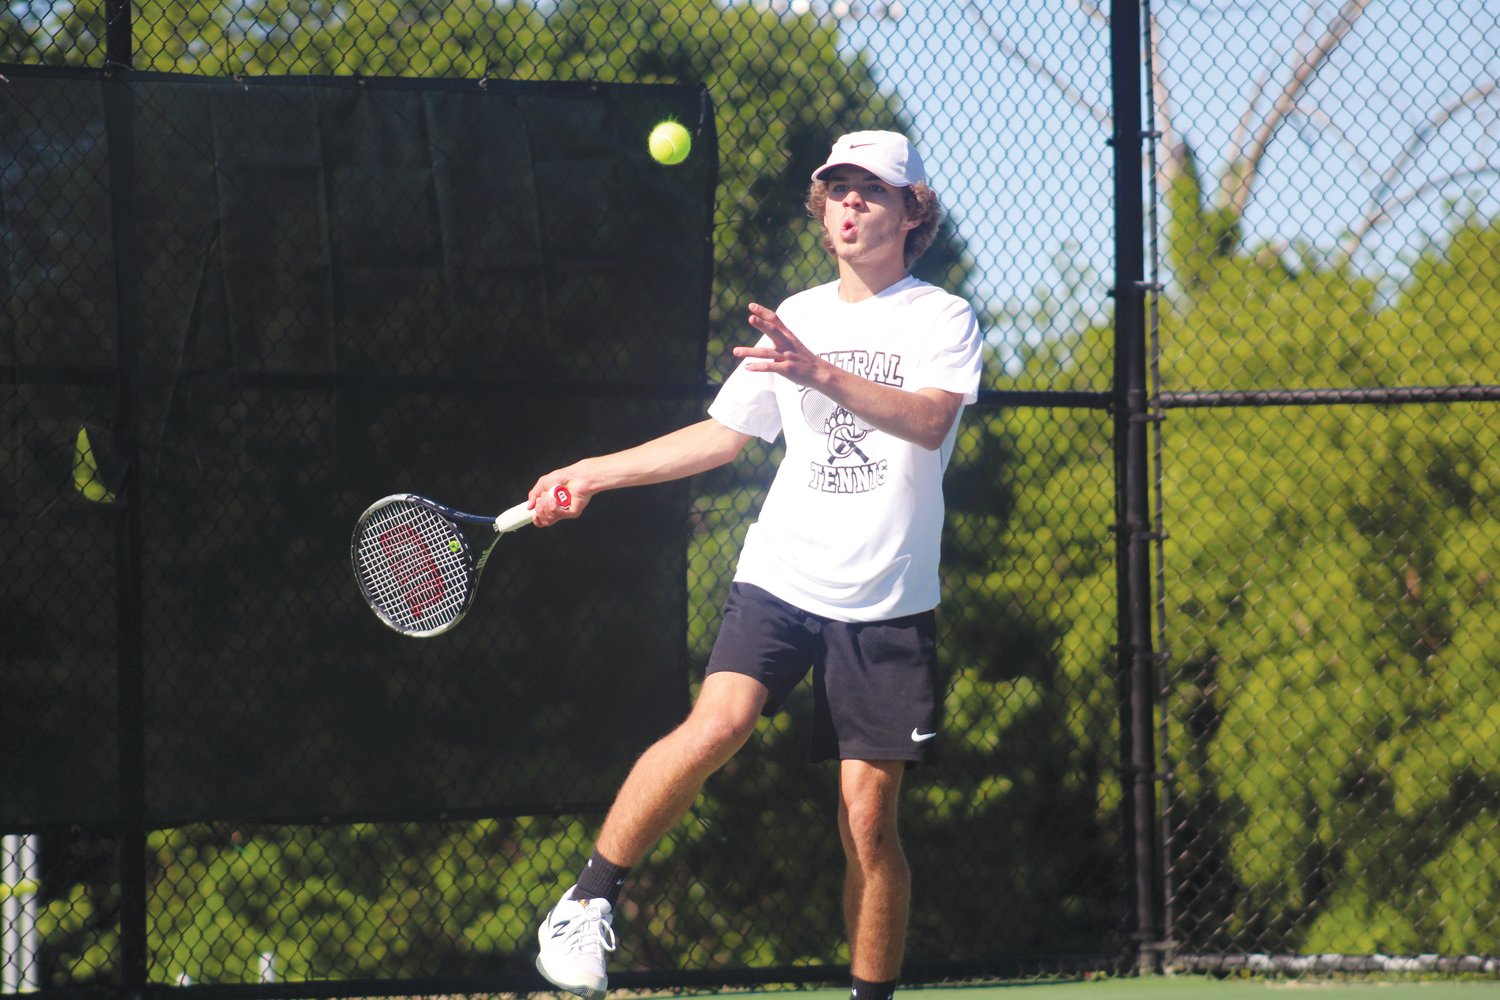 Chatham Central sophomore Seth Gilliland winds up to hit a forehand during his singles match against Clover Garden's Ayden Taylor. Gilliland earned a come-from-behind, tiebreaking win, 4-6, 7-5 (10-5) in what his head coach Heather Brooks called a 'pivotal' match.